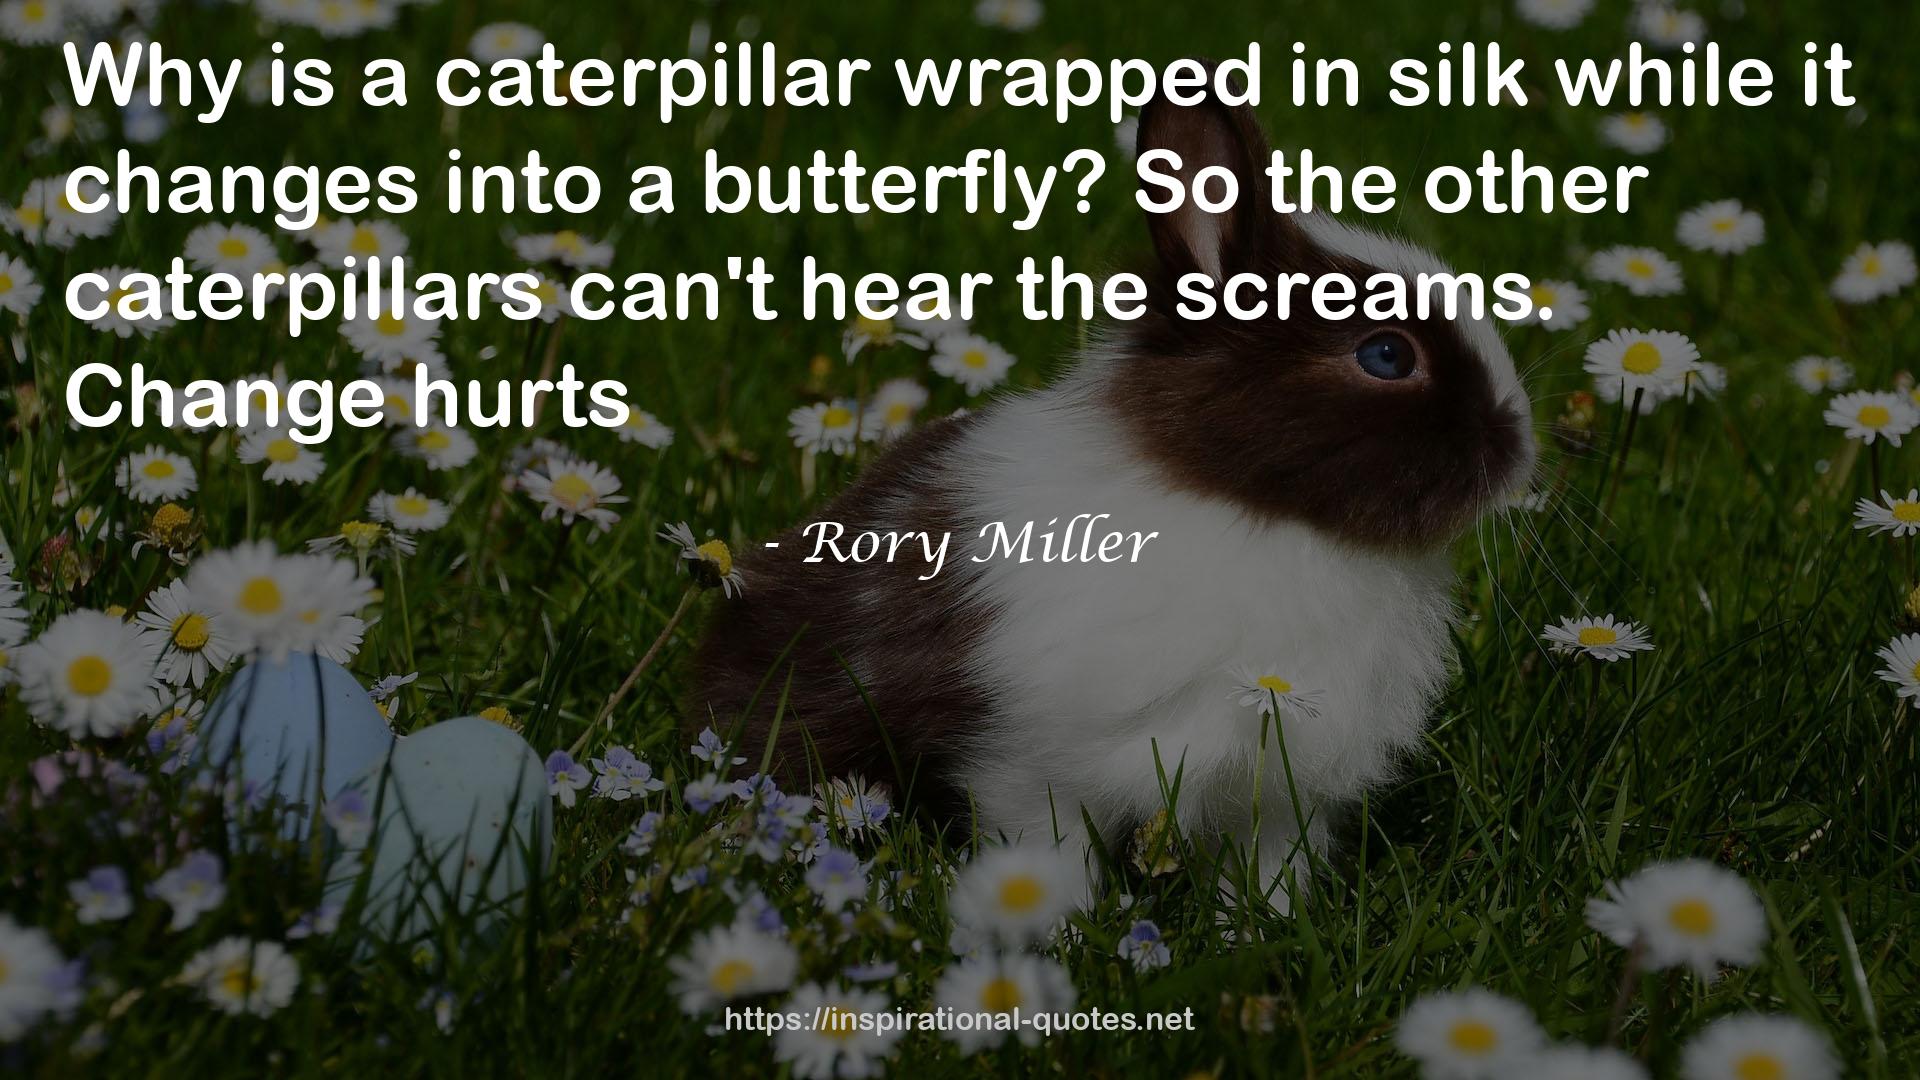 Rory Miller QUOTES